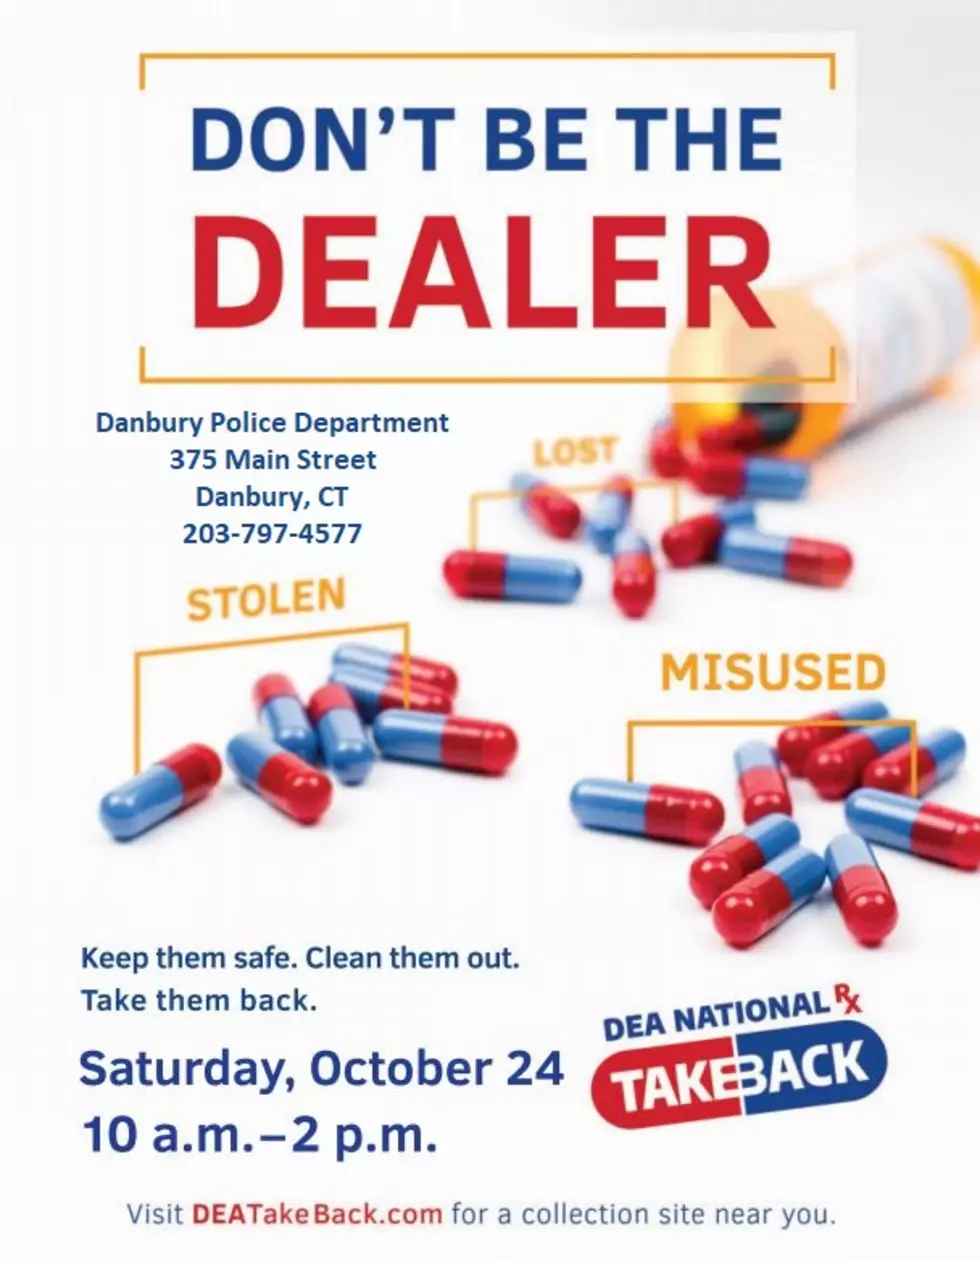 Drug Take-Back Events to Be Held in Various Connecticut Towns